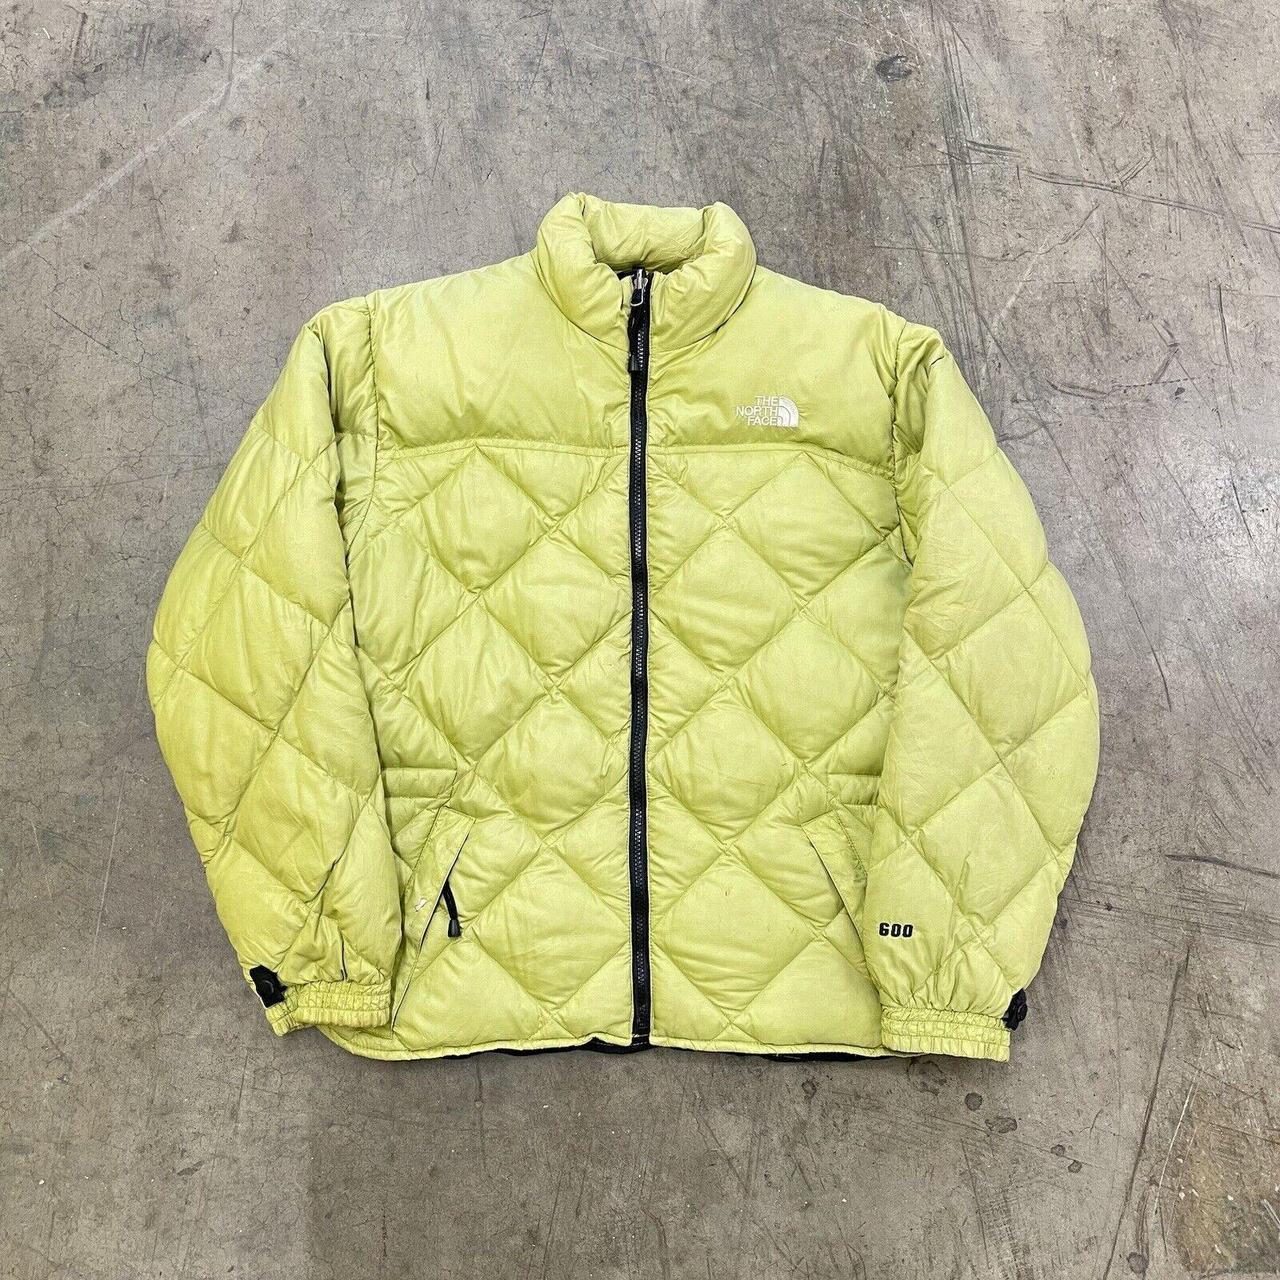 The North Face Women's Green Jacket | Depop